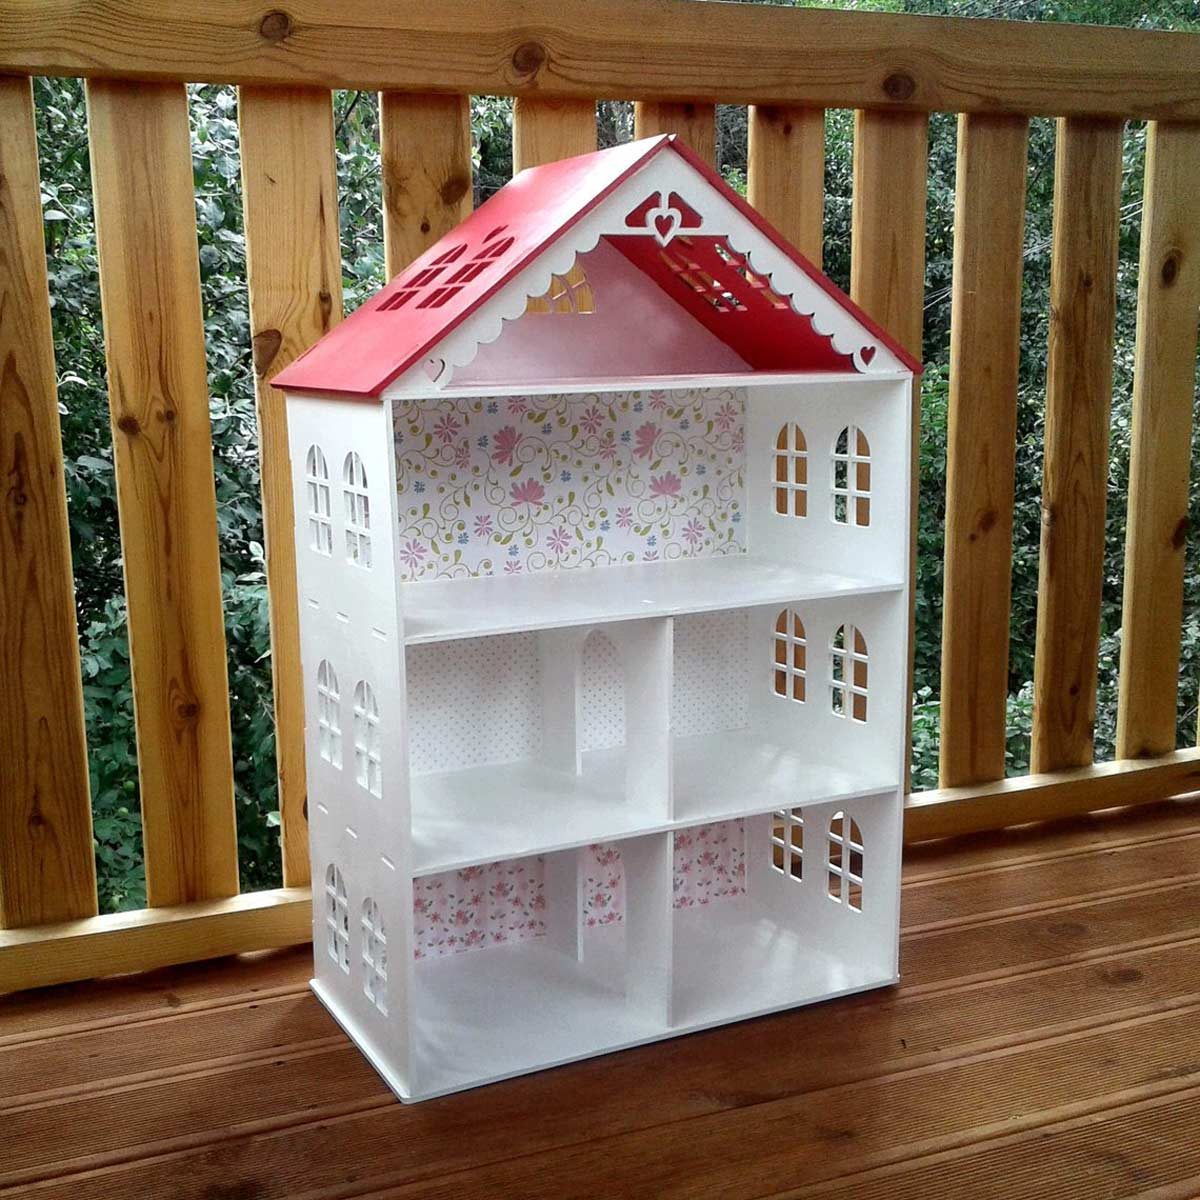 10 Homemade Barbie Houses You Wish You Lived In